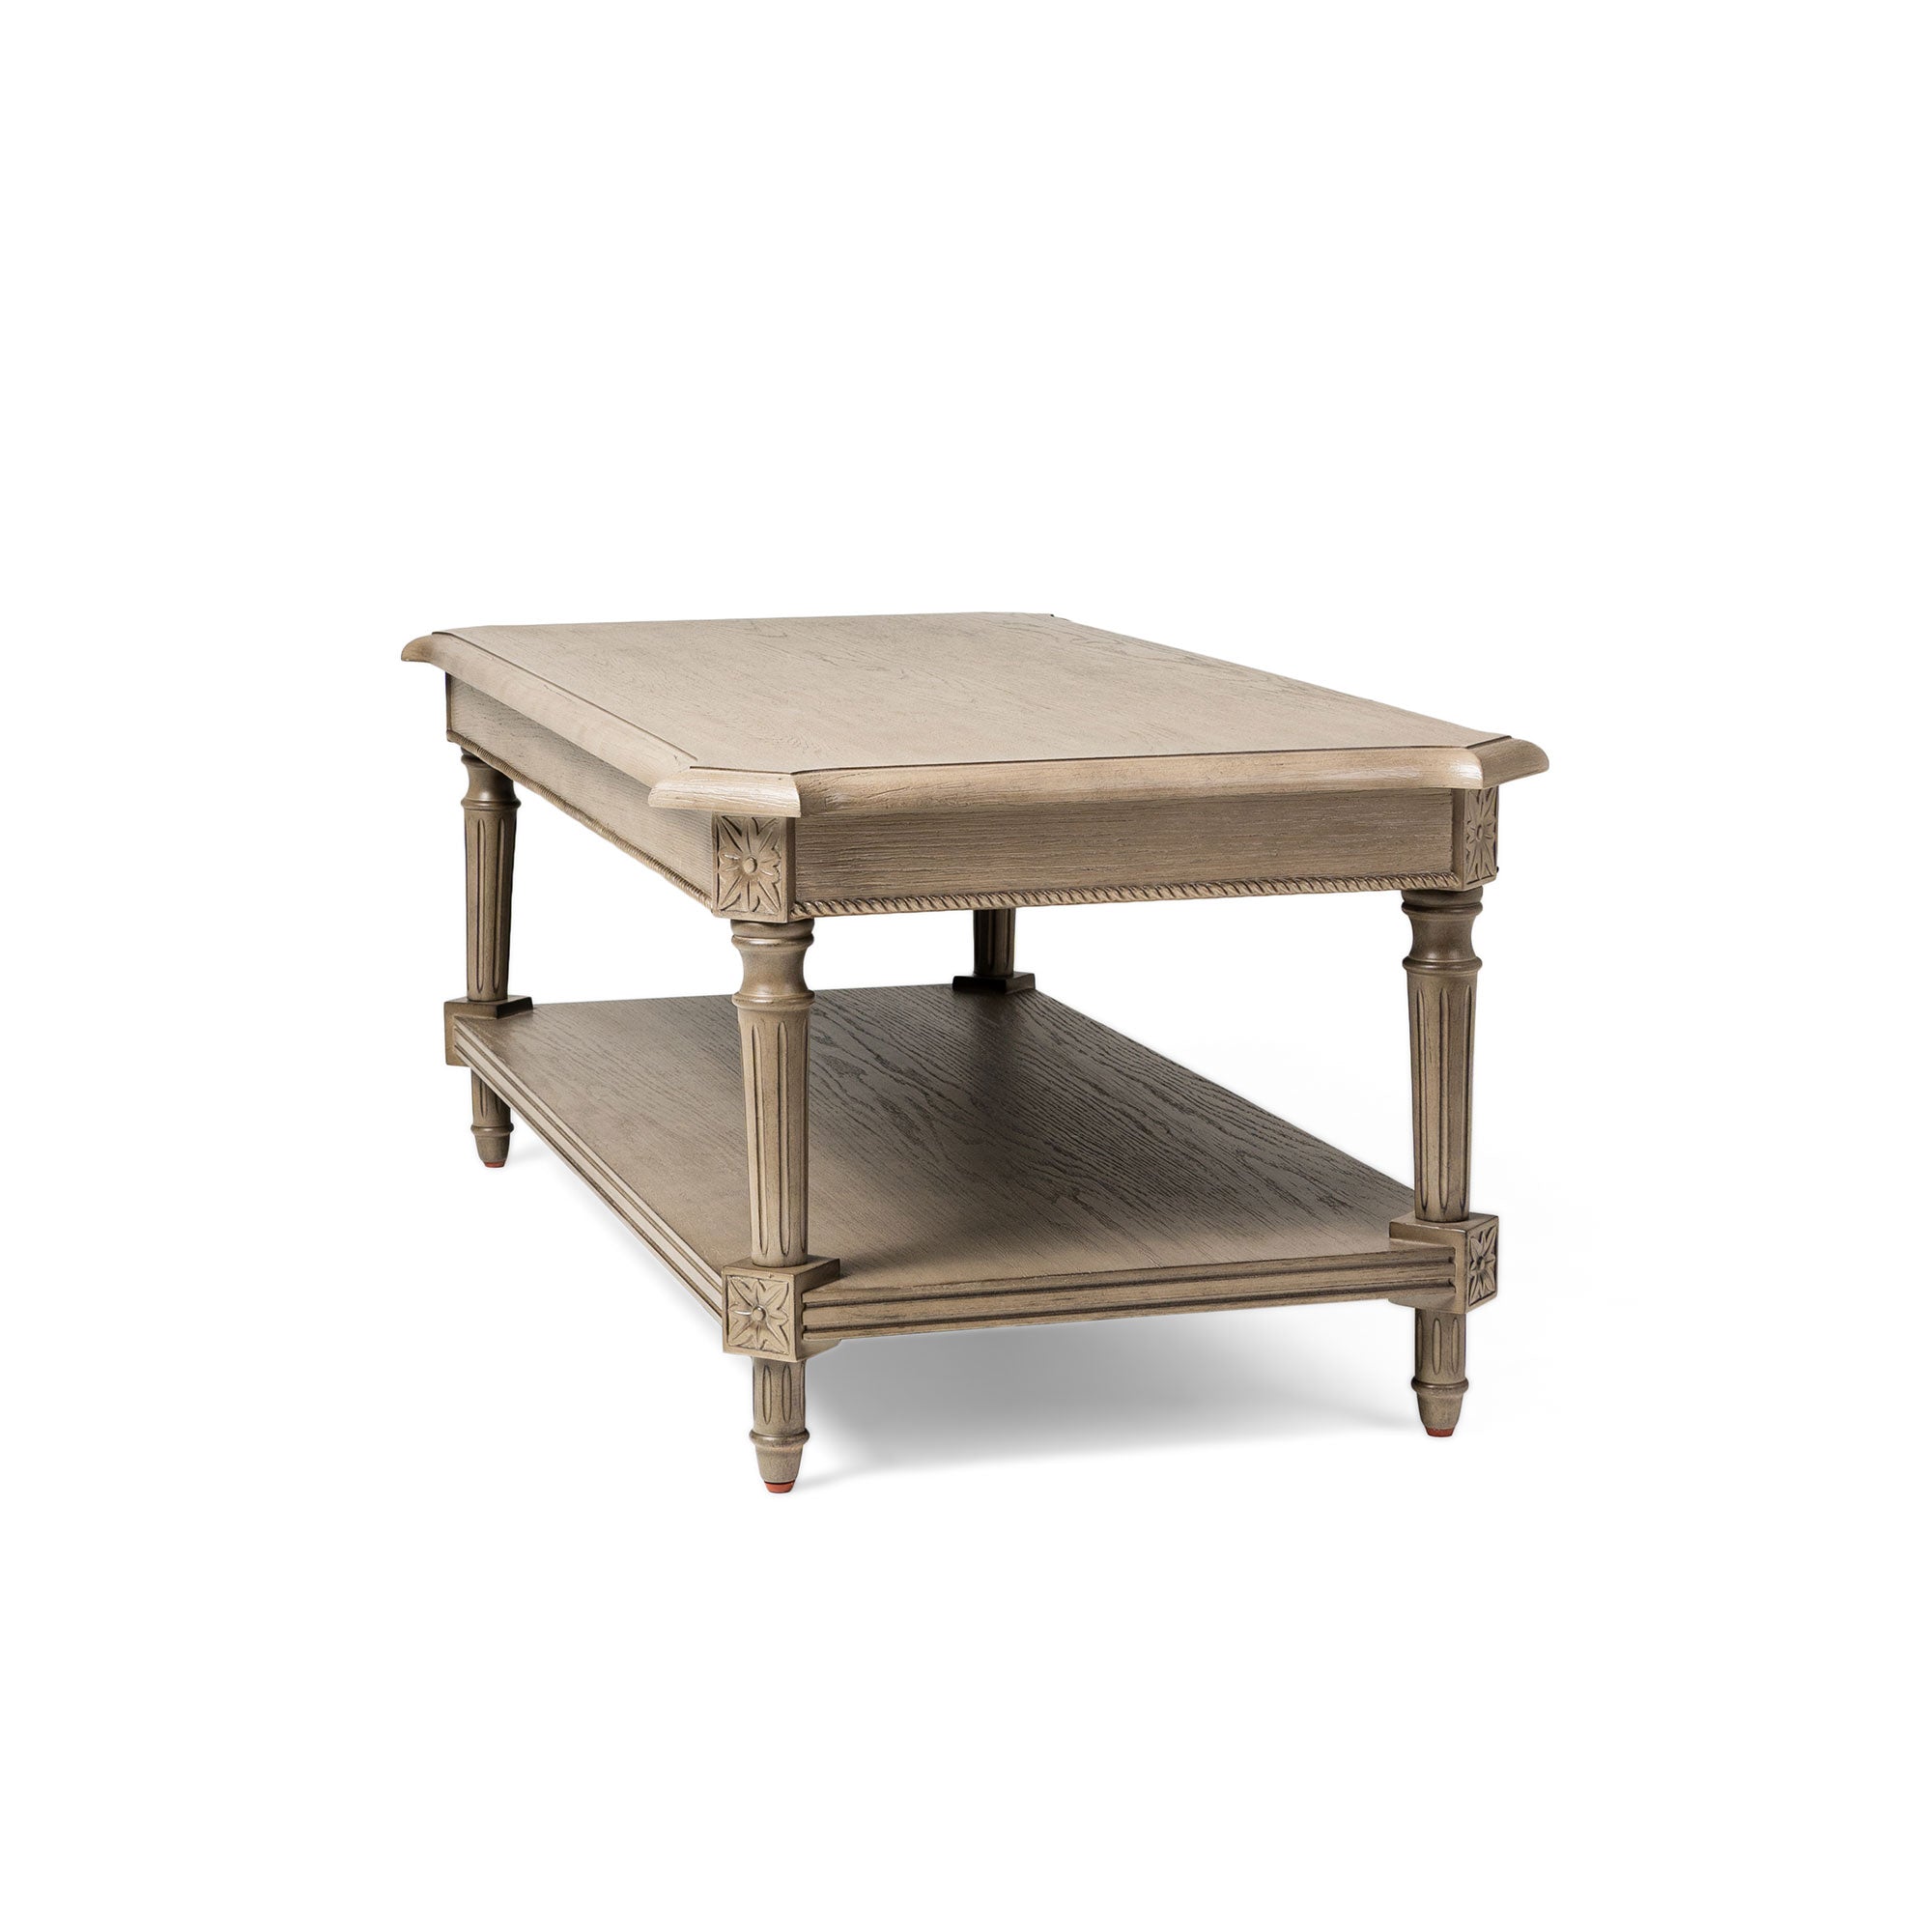 Pullman Traditional Rectangular Wooden Coffee Table in Antiqued Grey Finish in Accent Tables by Maven Lane